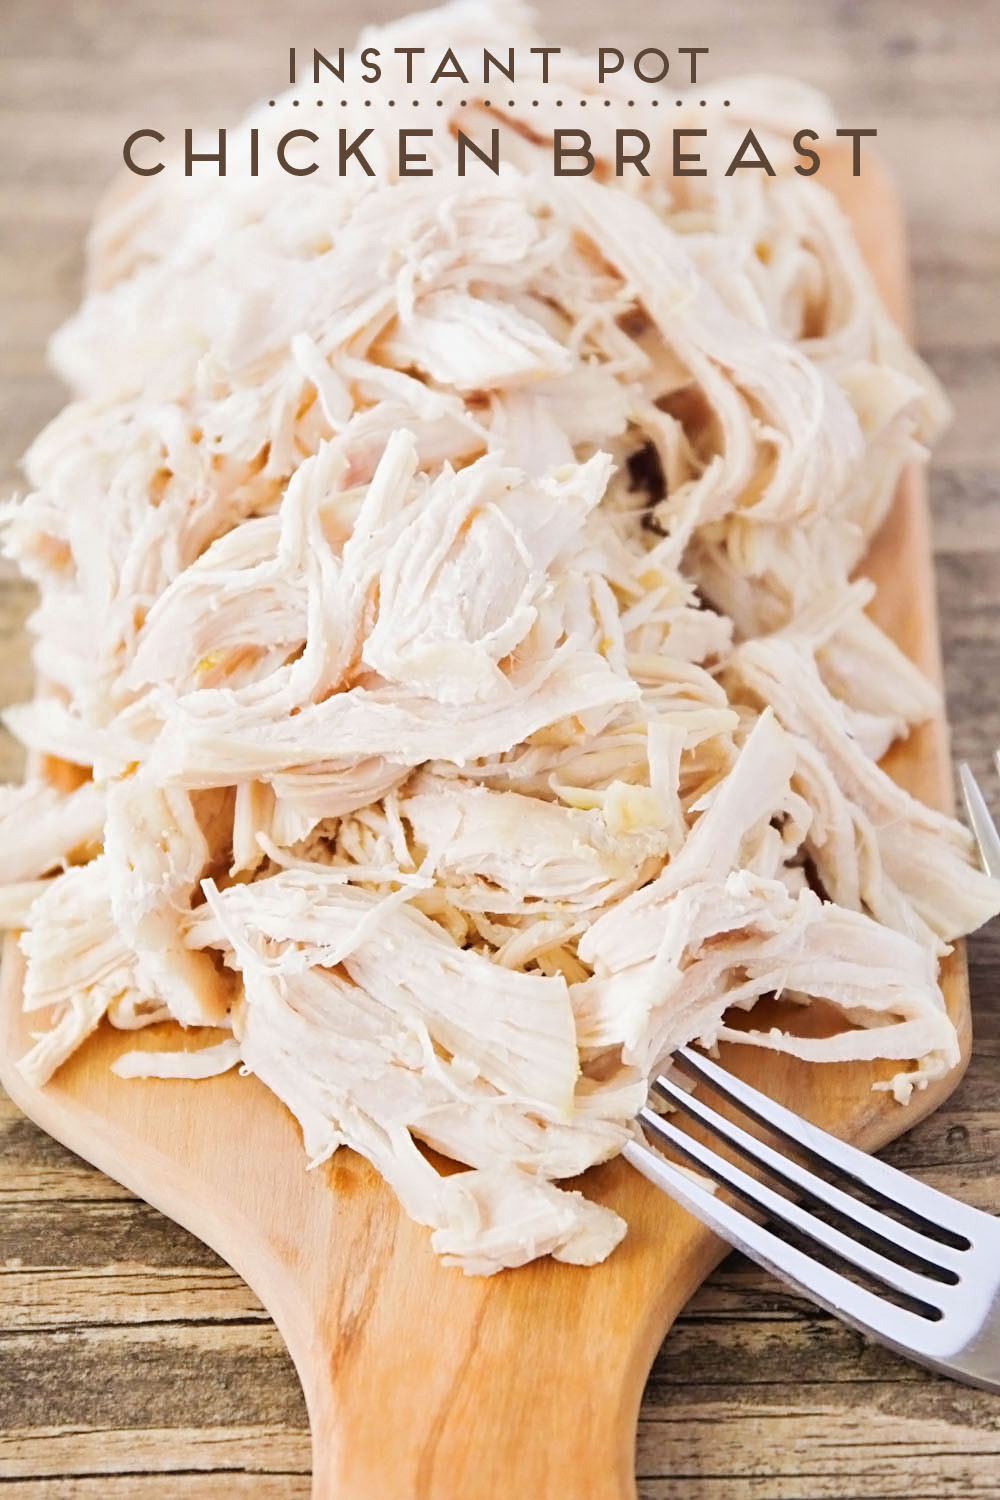 Who knew it was so easy to make chicken breast in an Instant Pot? Cook chicken from frozen in just 25 minutes!